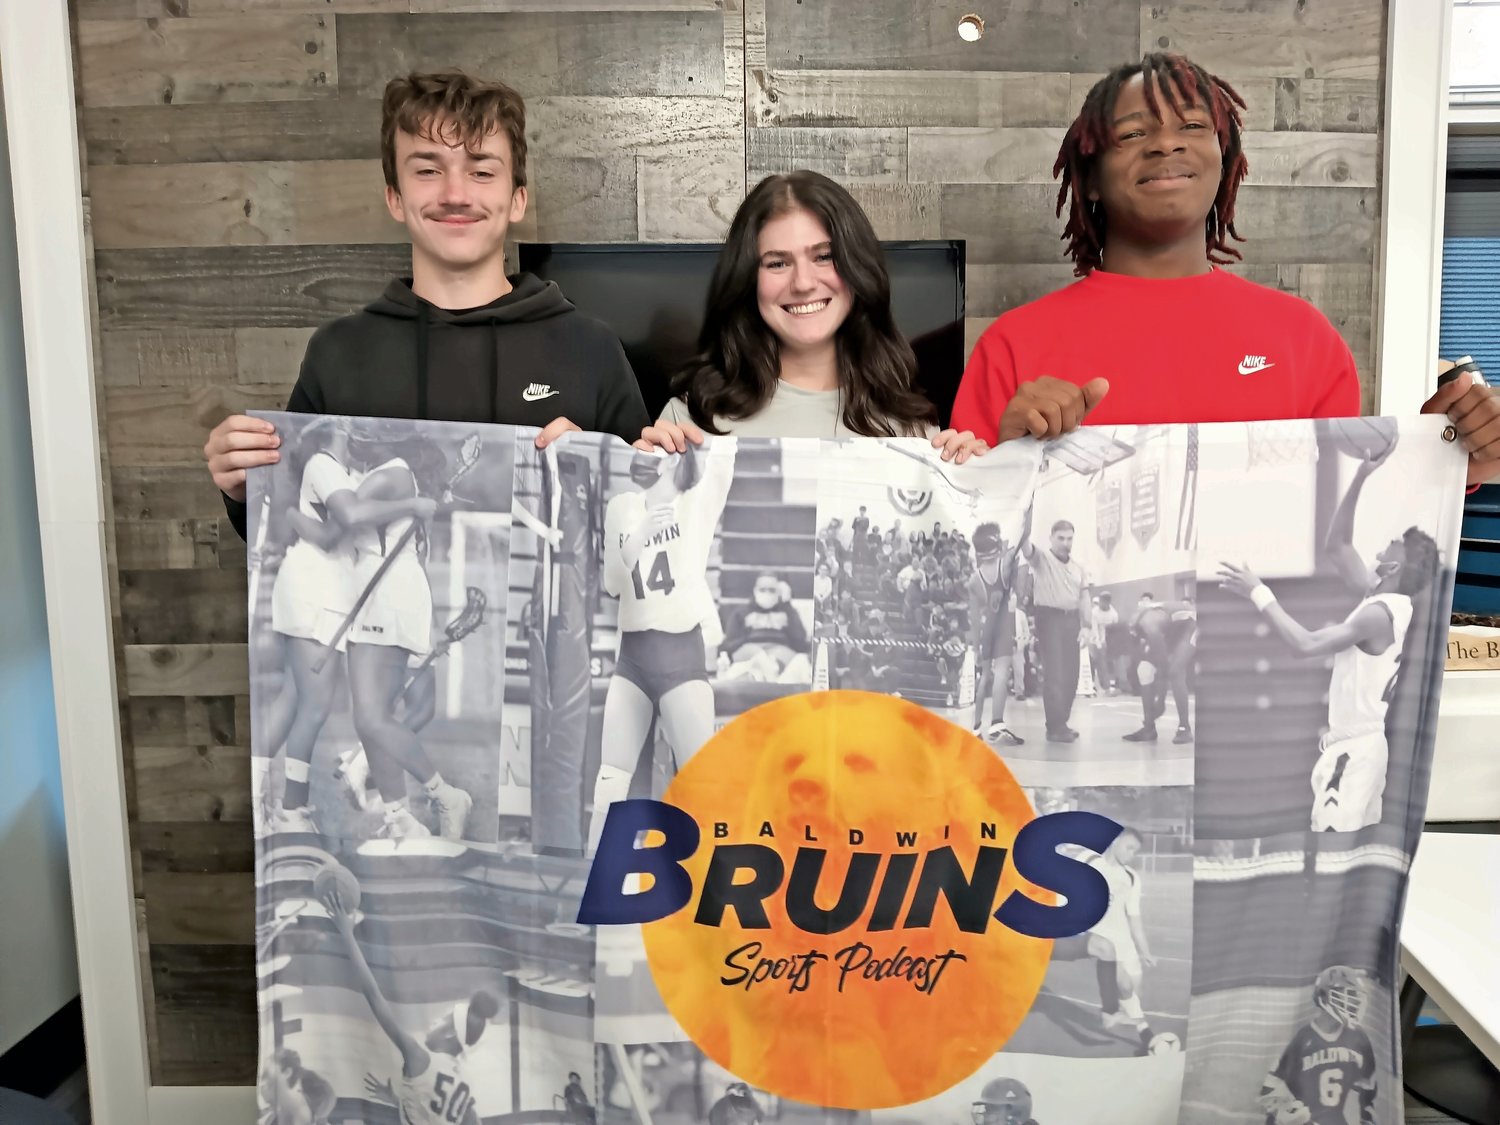 Seniors Joey Fullone and Ava Reyer, and junior Aaron Bell, joined the fourth-year team of the award-winning Baldwin Bruins Sports Podcast.